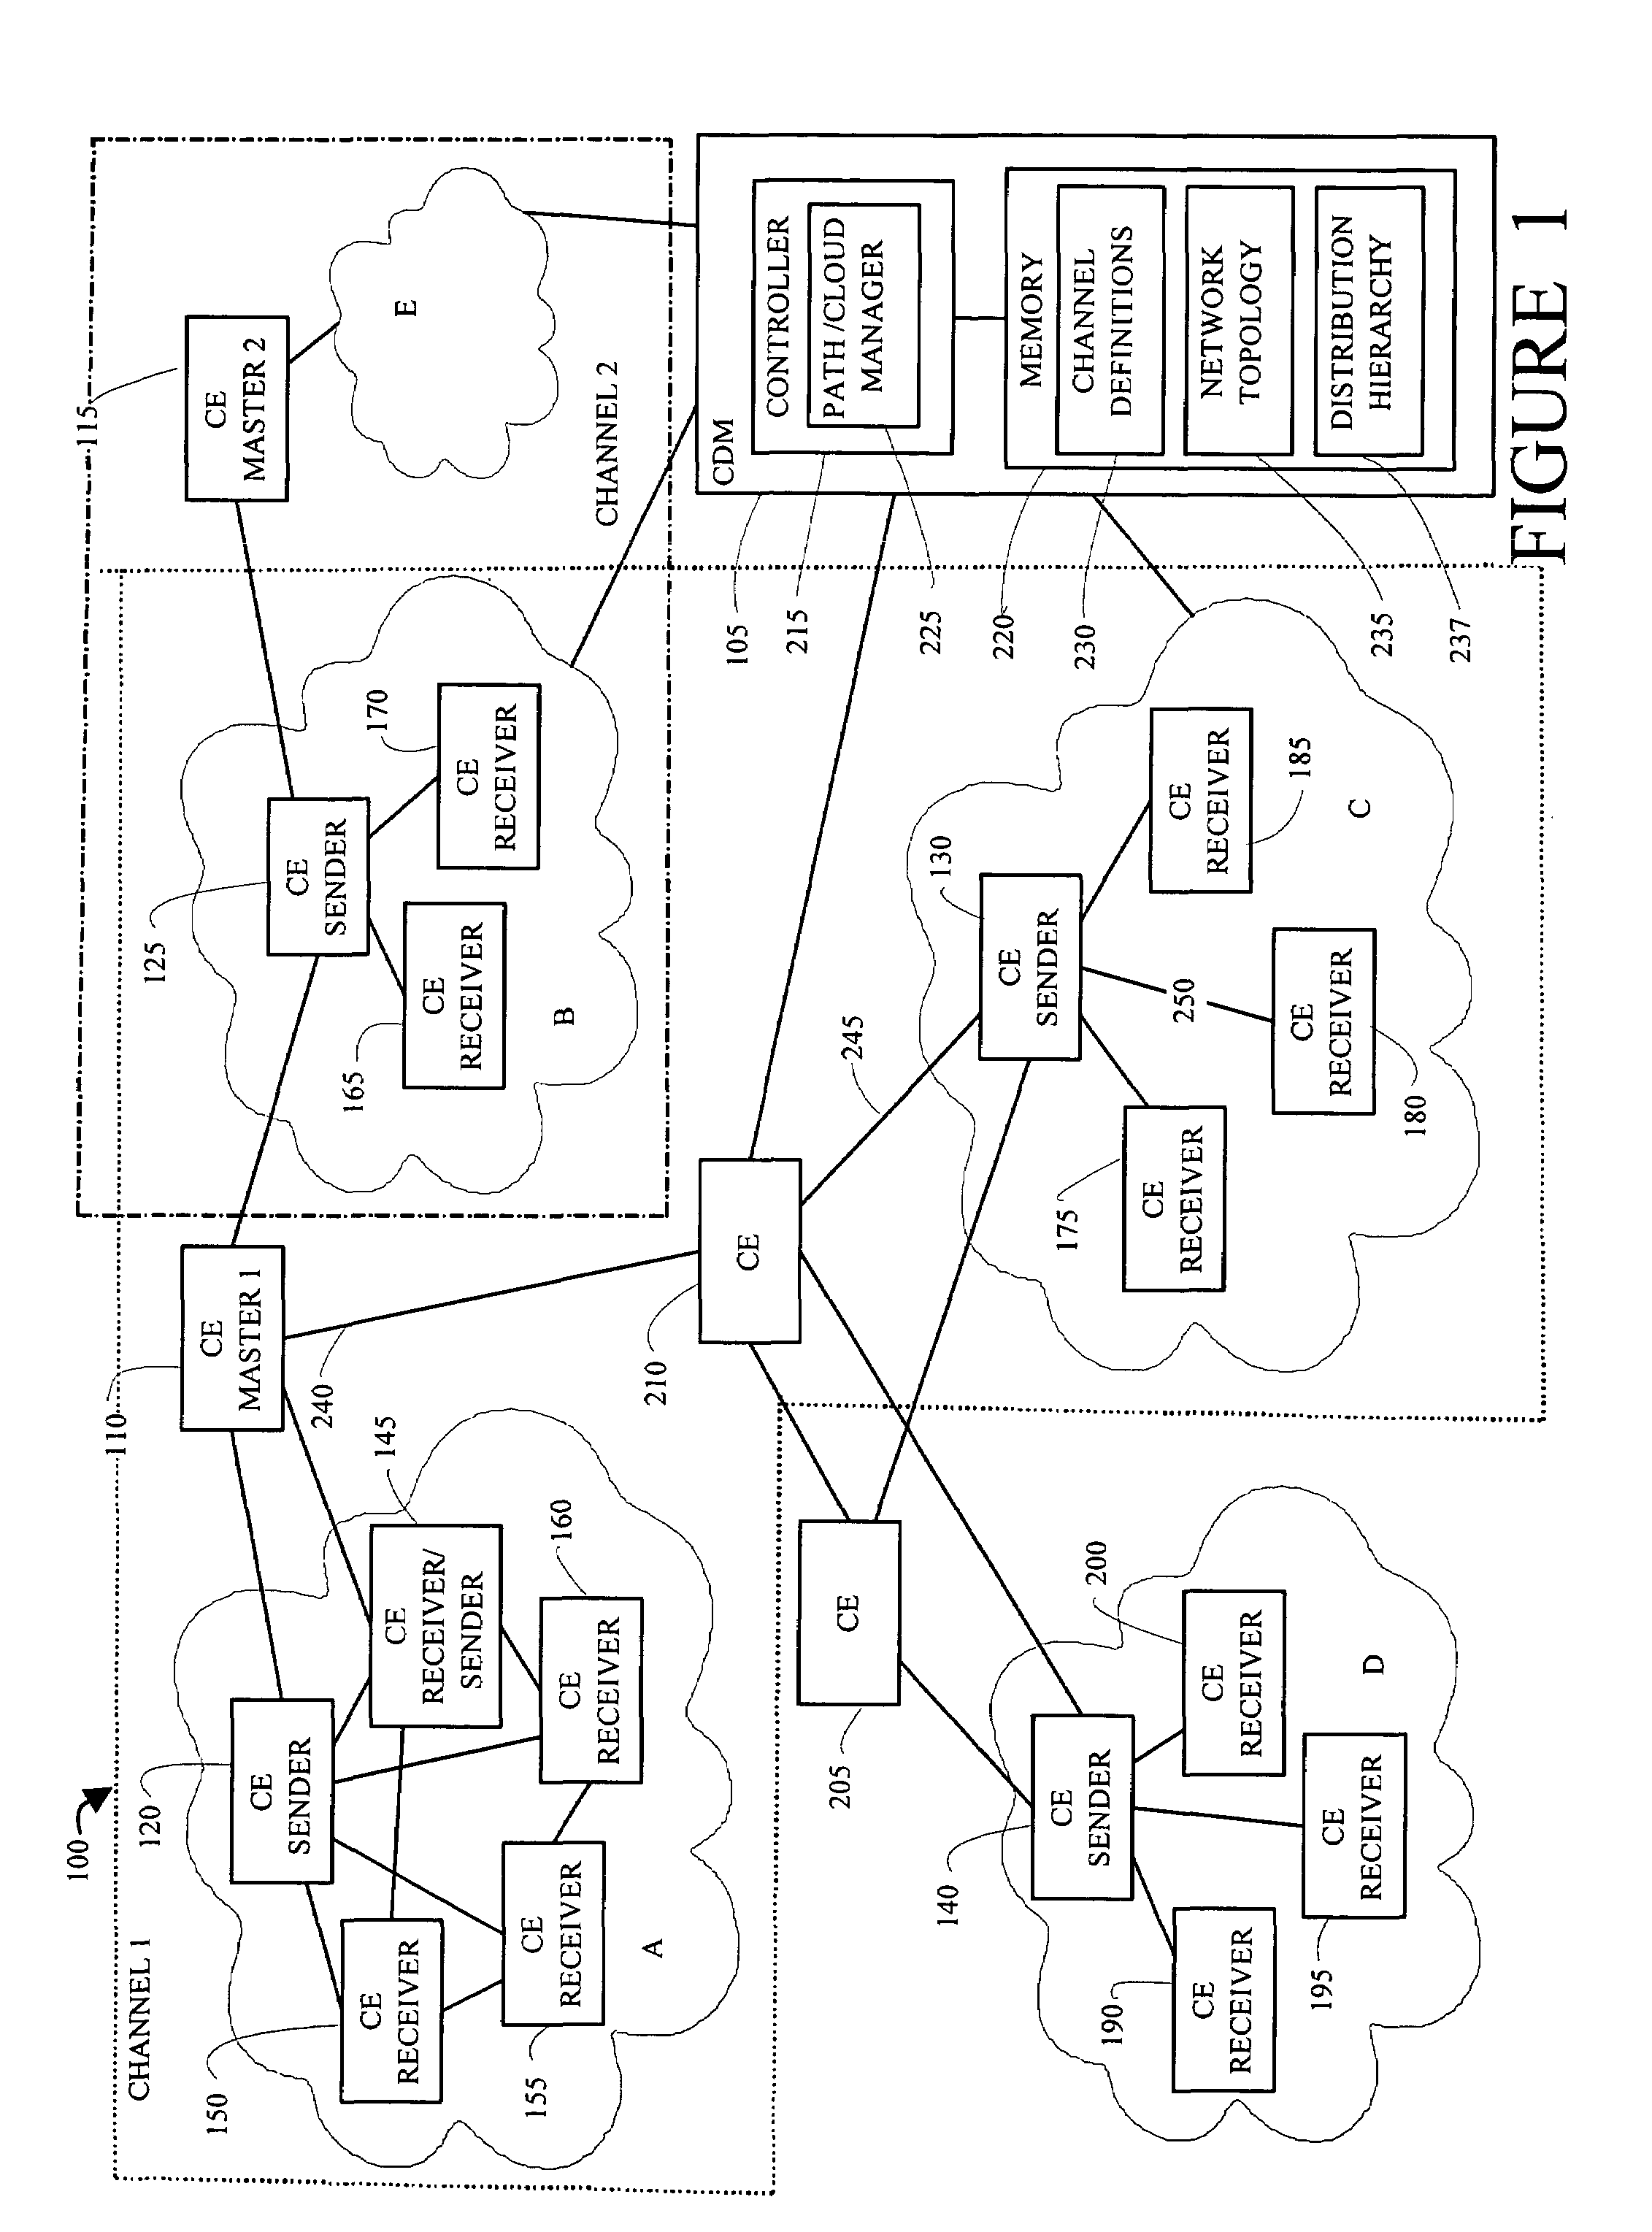 Method and apparatus for multicast cloud with integrated multicast and unicast channel routing in a content distribution network